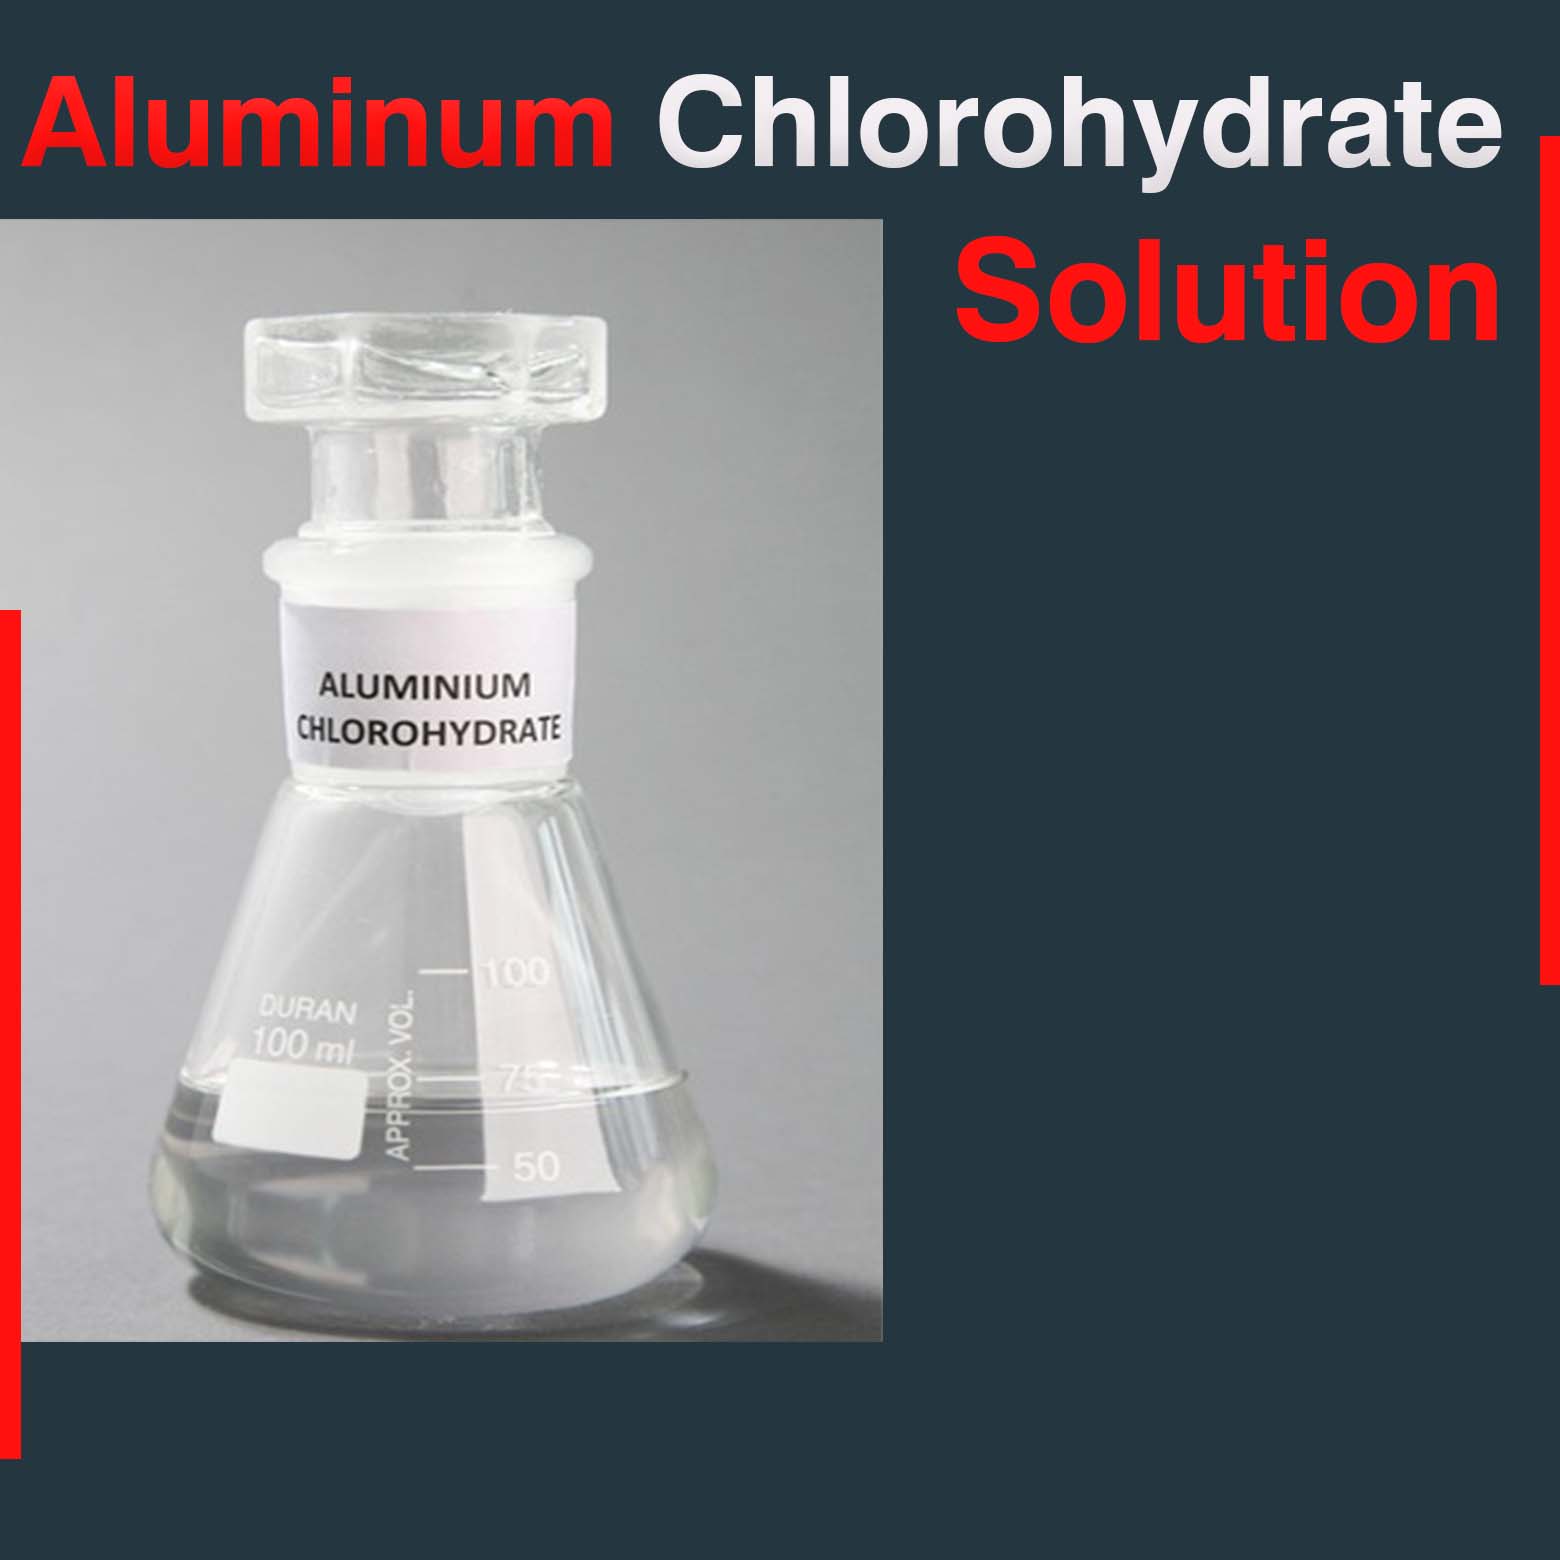 Aluminum Chlorohydrate Solution Suppliers